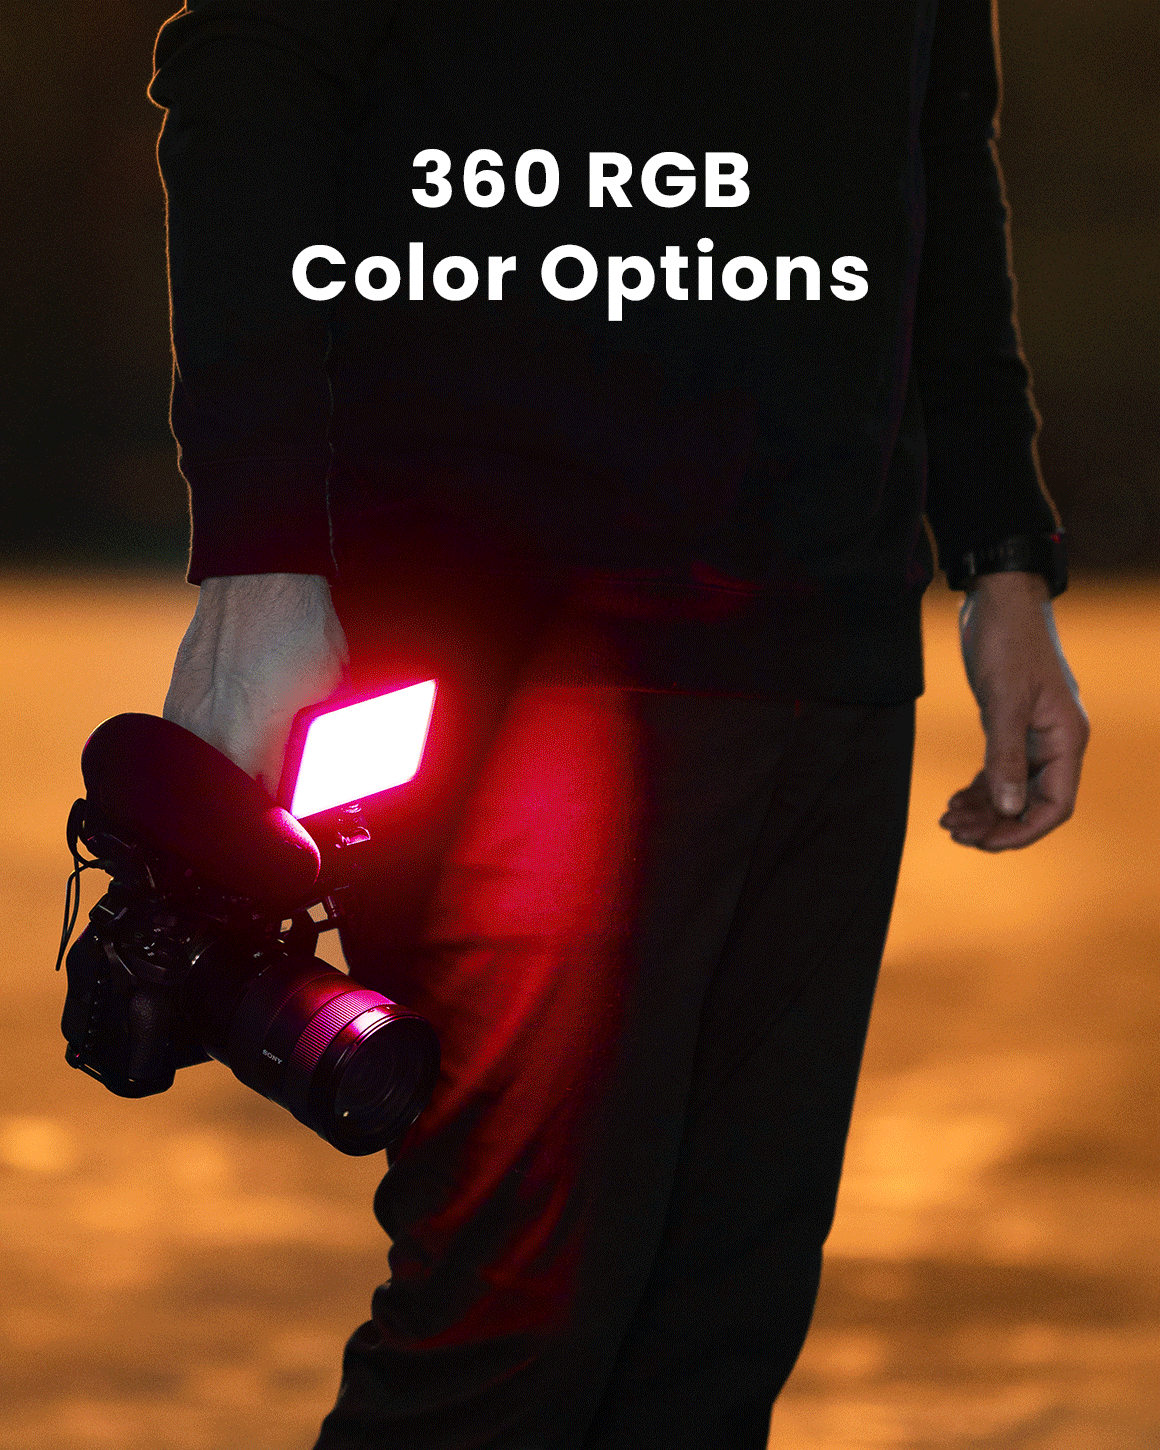 360 RGB Color Options shown flashing on Lume Cube RGB Panel Pro while mounted on camera at night.